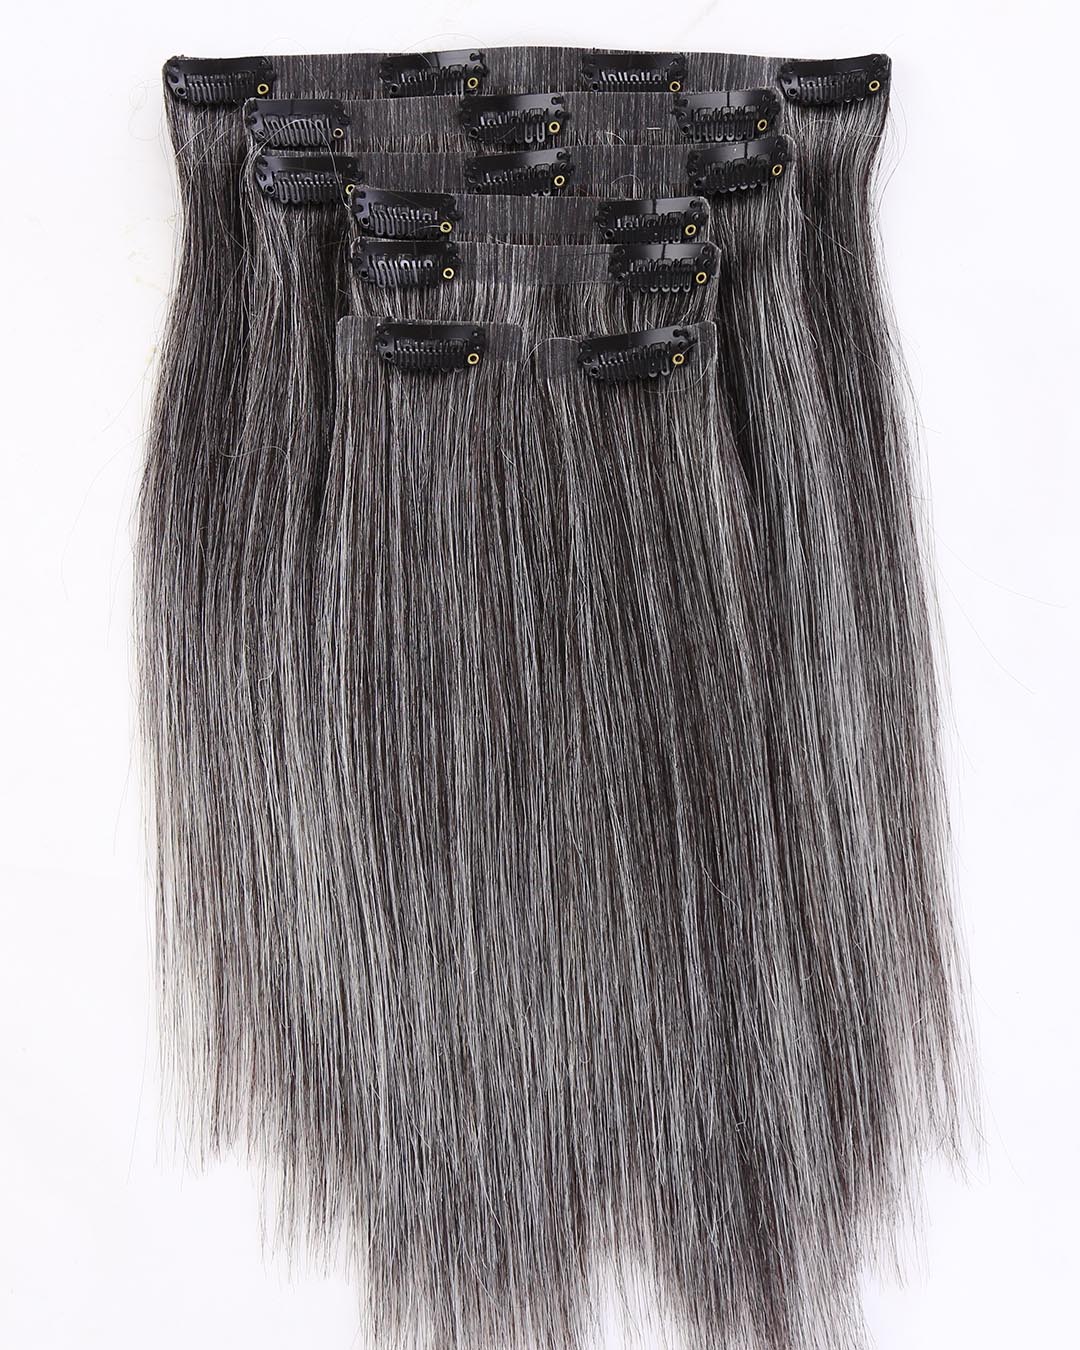 remy hair extensions clip in